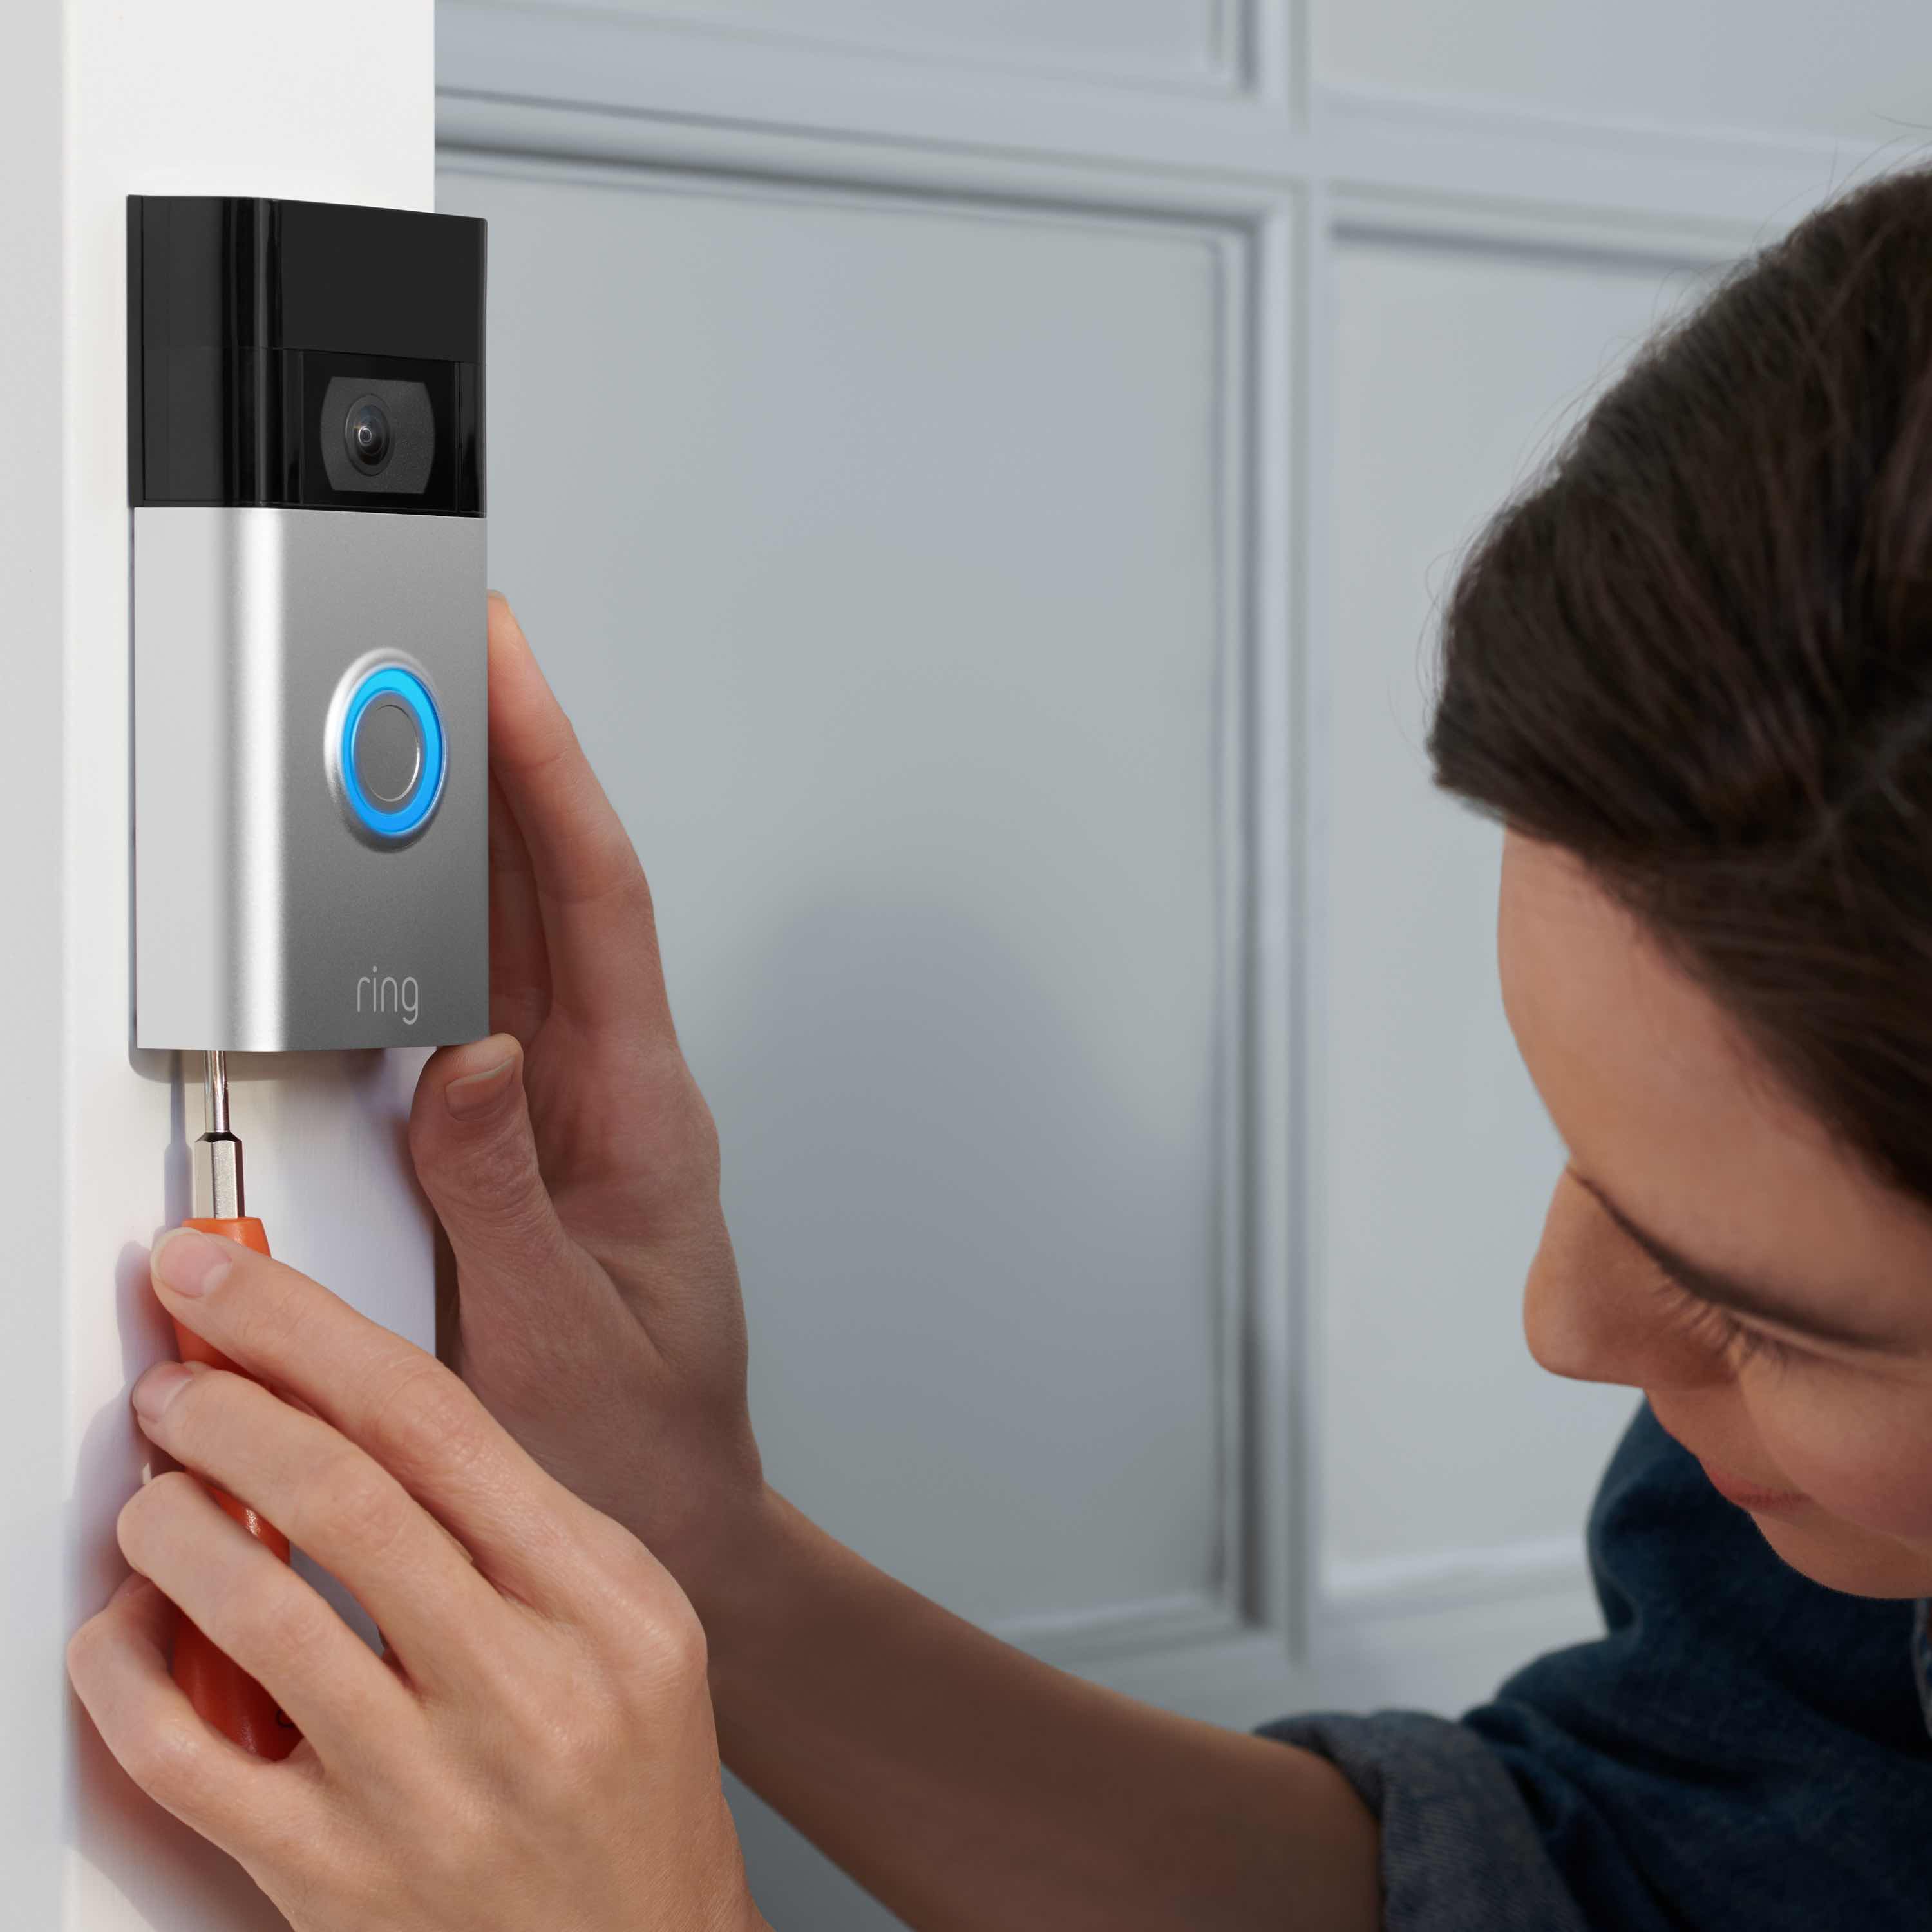 Video Doorbell (2nd Generation) (for Certified Refurbished) - Close up of person installing Certified Refurbished Video Doorbell 2nd Generation on door frame of home.